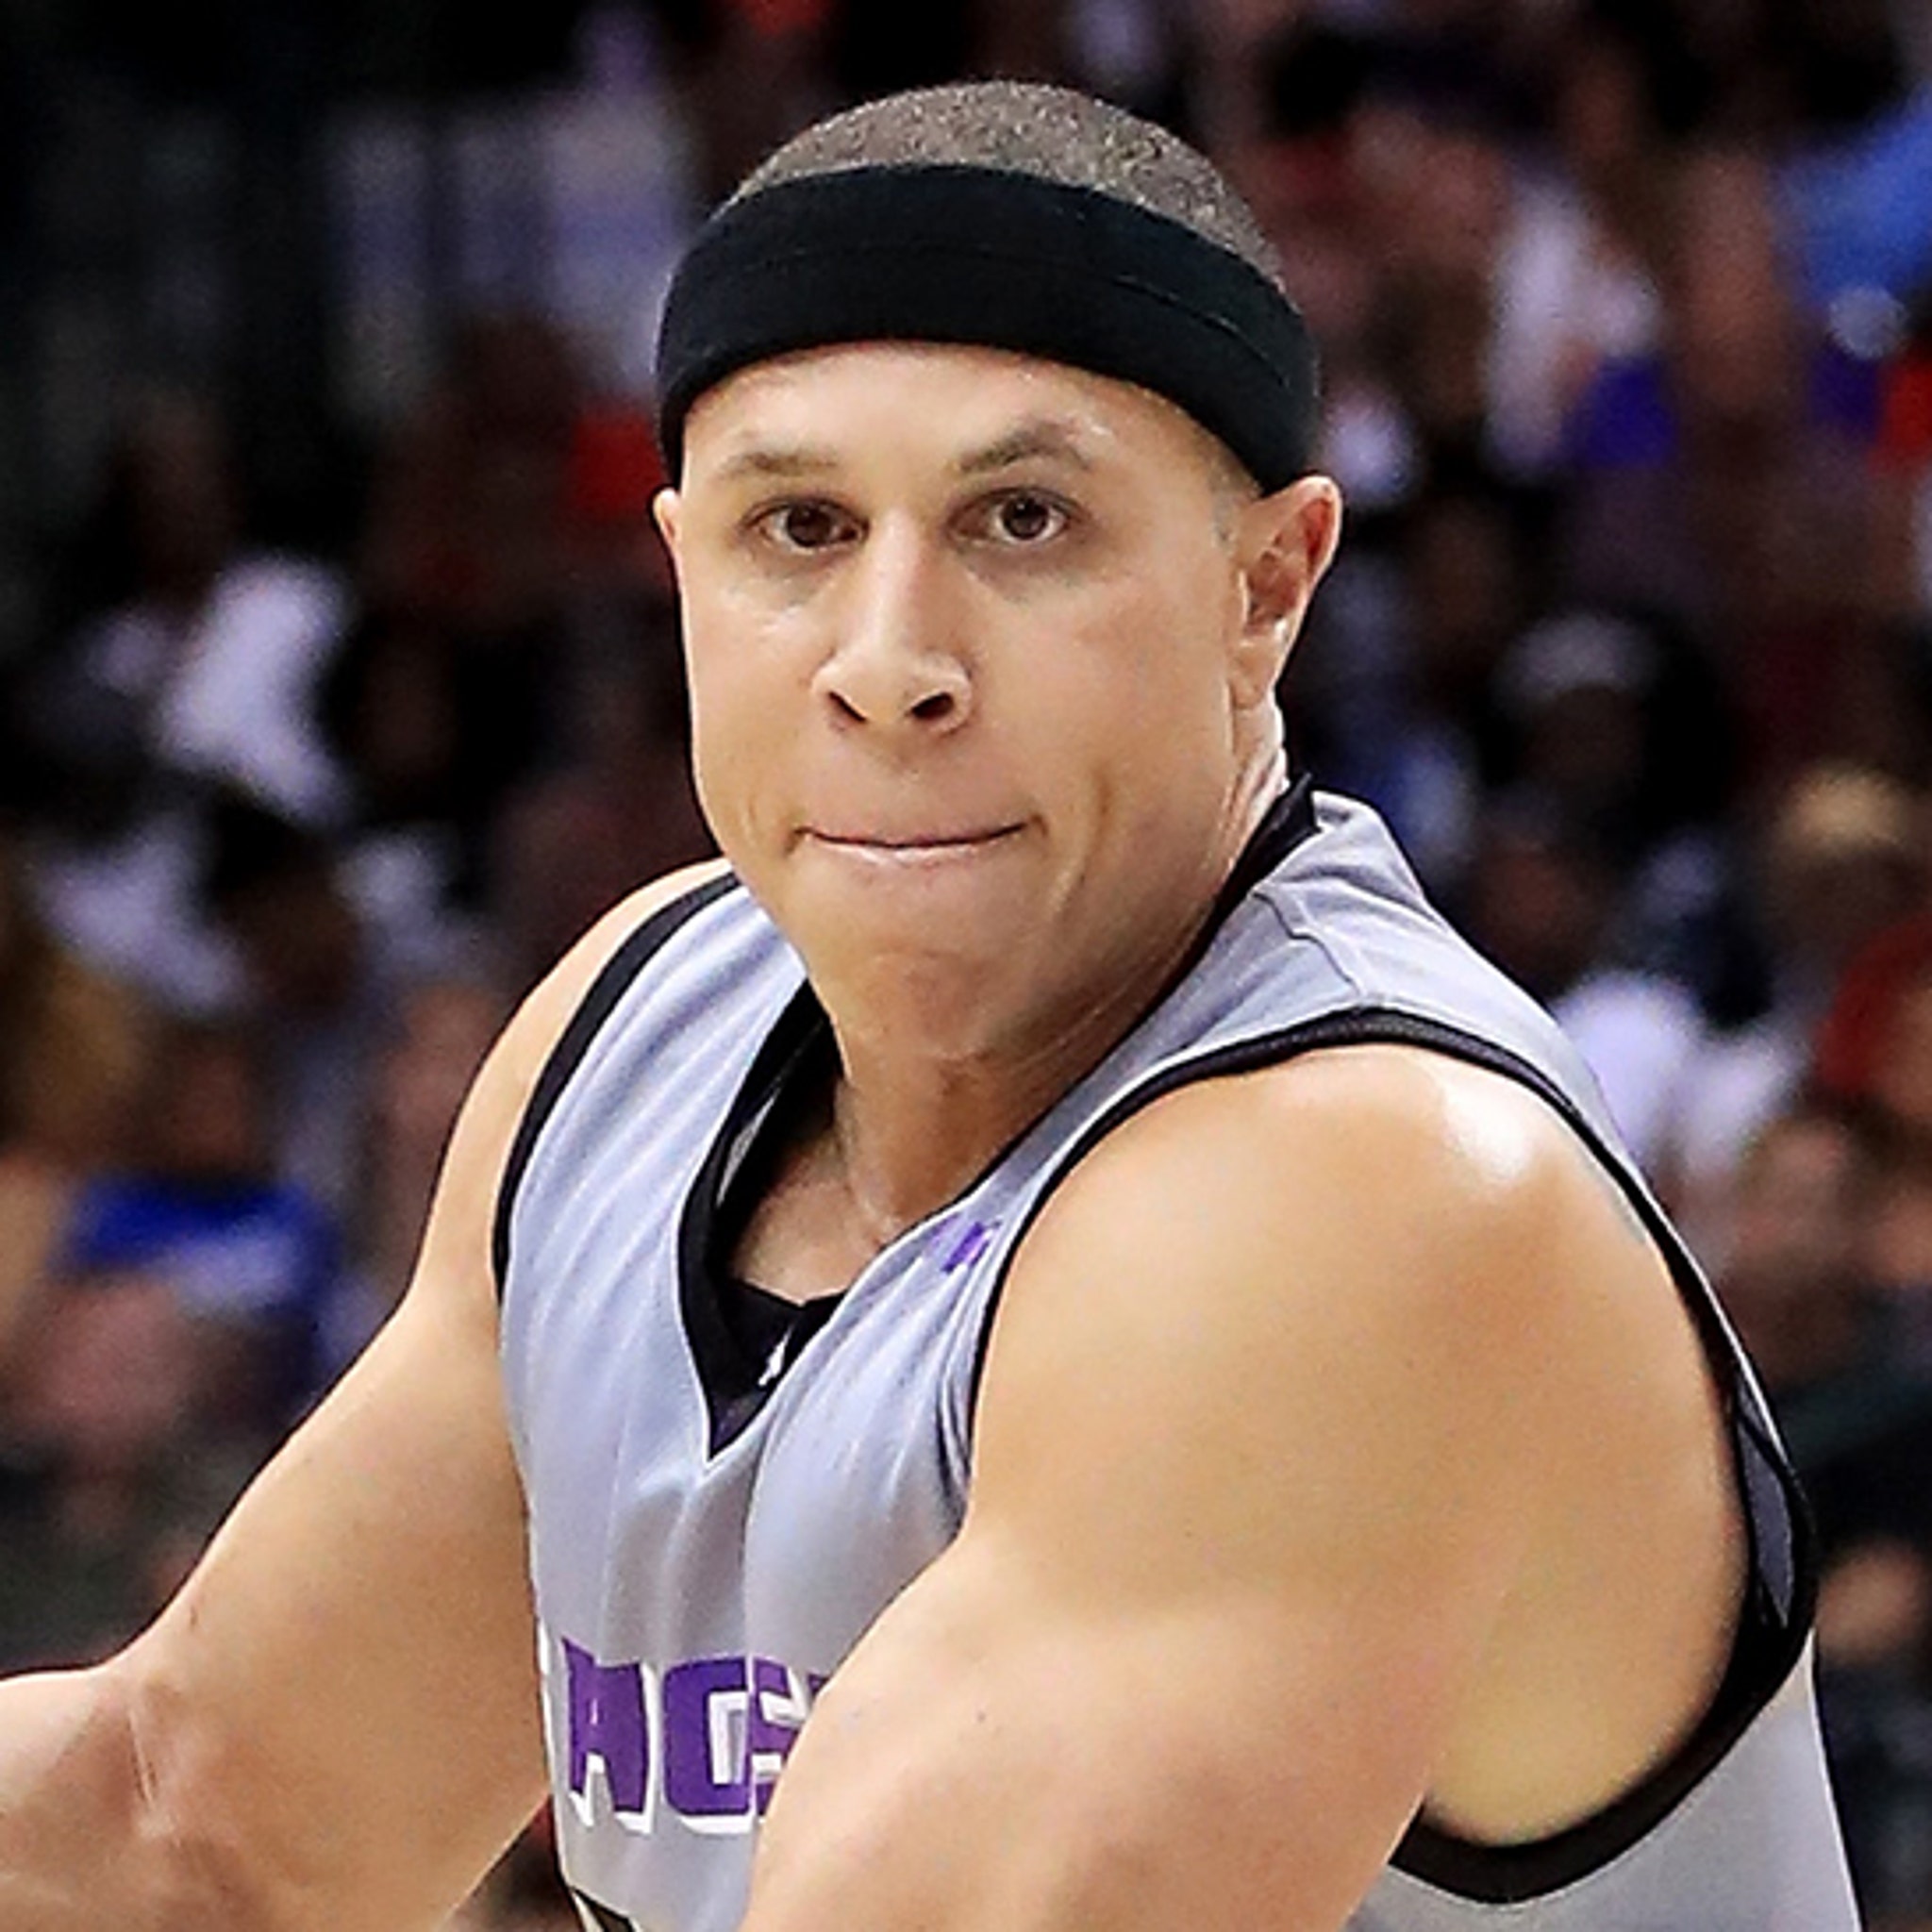 Details on Teacher Accusing Ex-NBA Mike Bibby of Forcing Her in